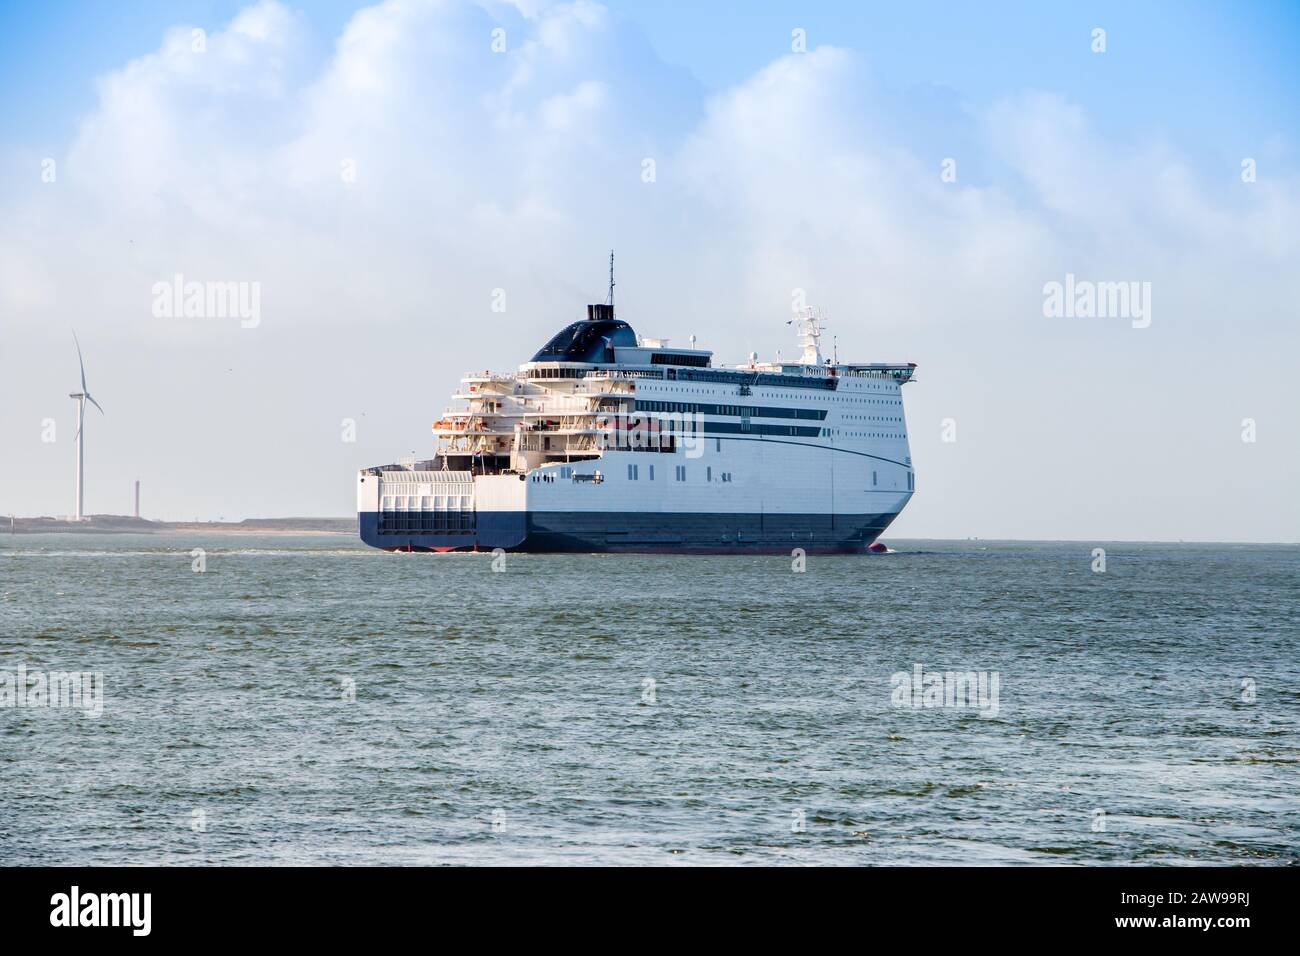 View of the river 'the new waterway' in winter, near Hoek van Holland with cargo ships, a frequently used industrial shipping route in South Holland Stock Photo